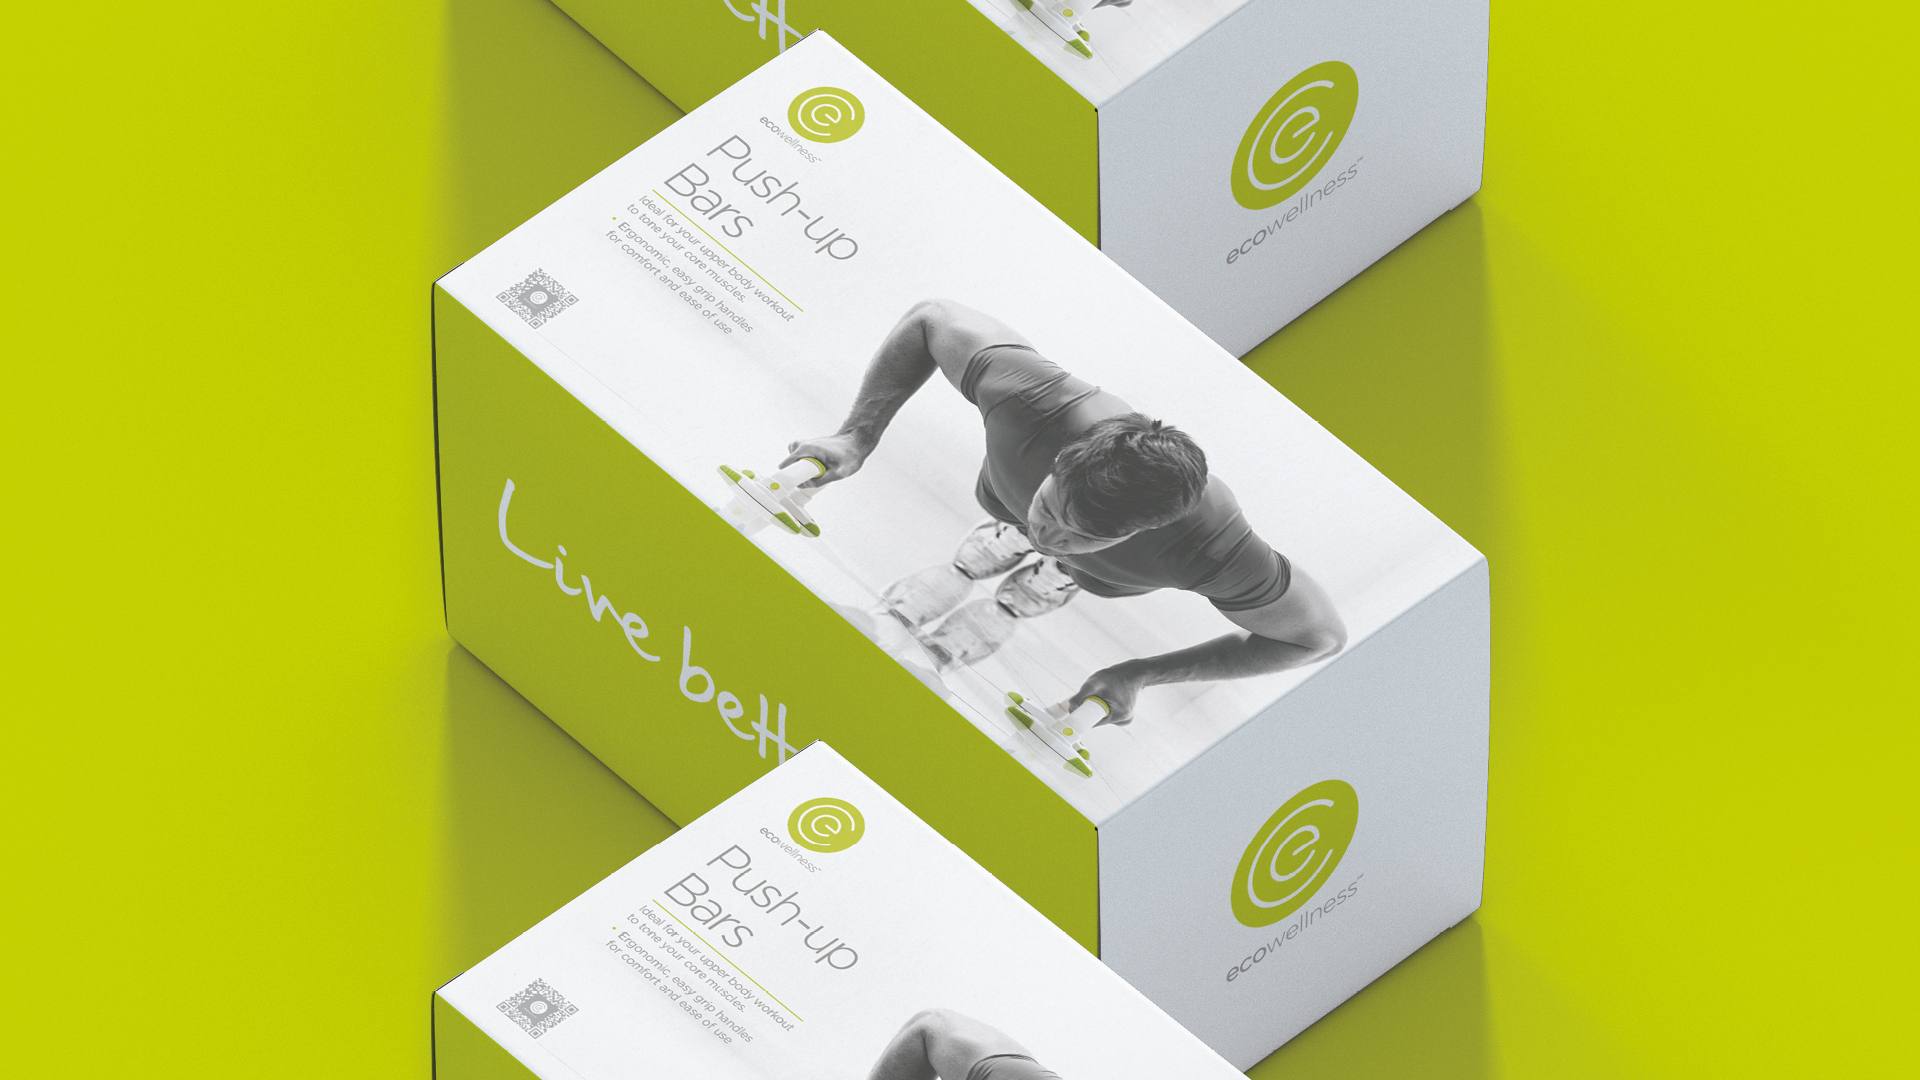 Repositioning a green fitness brand